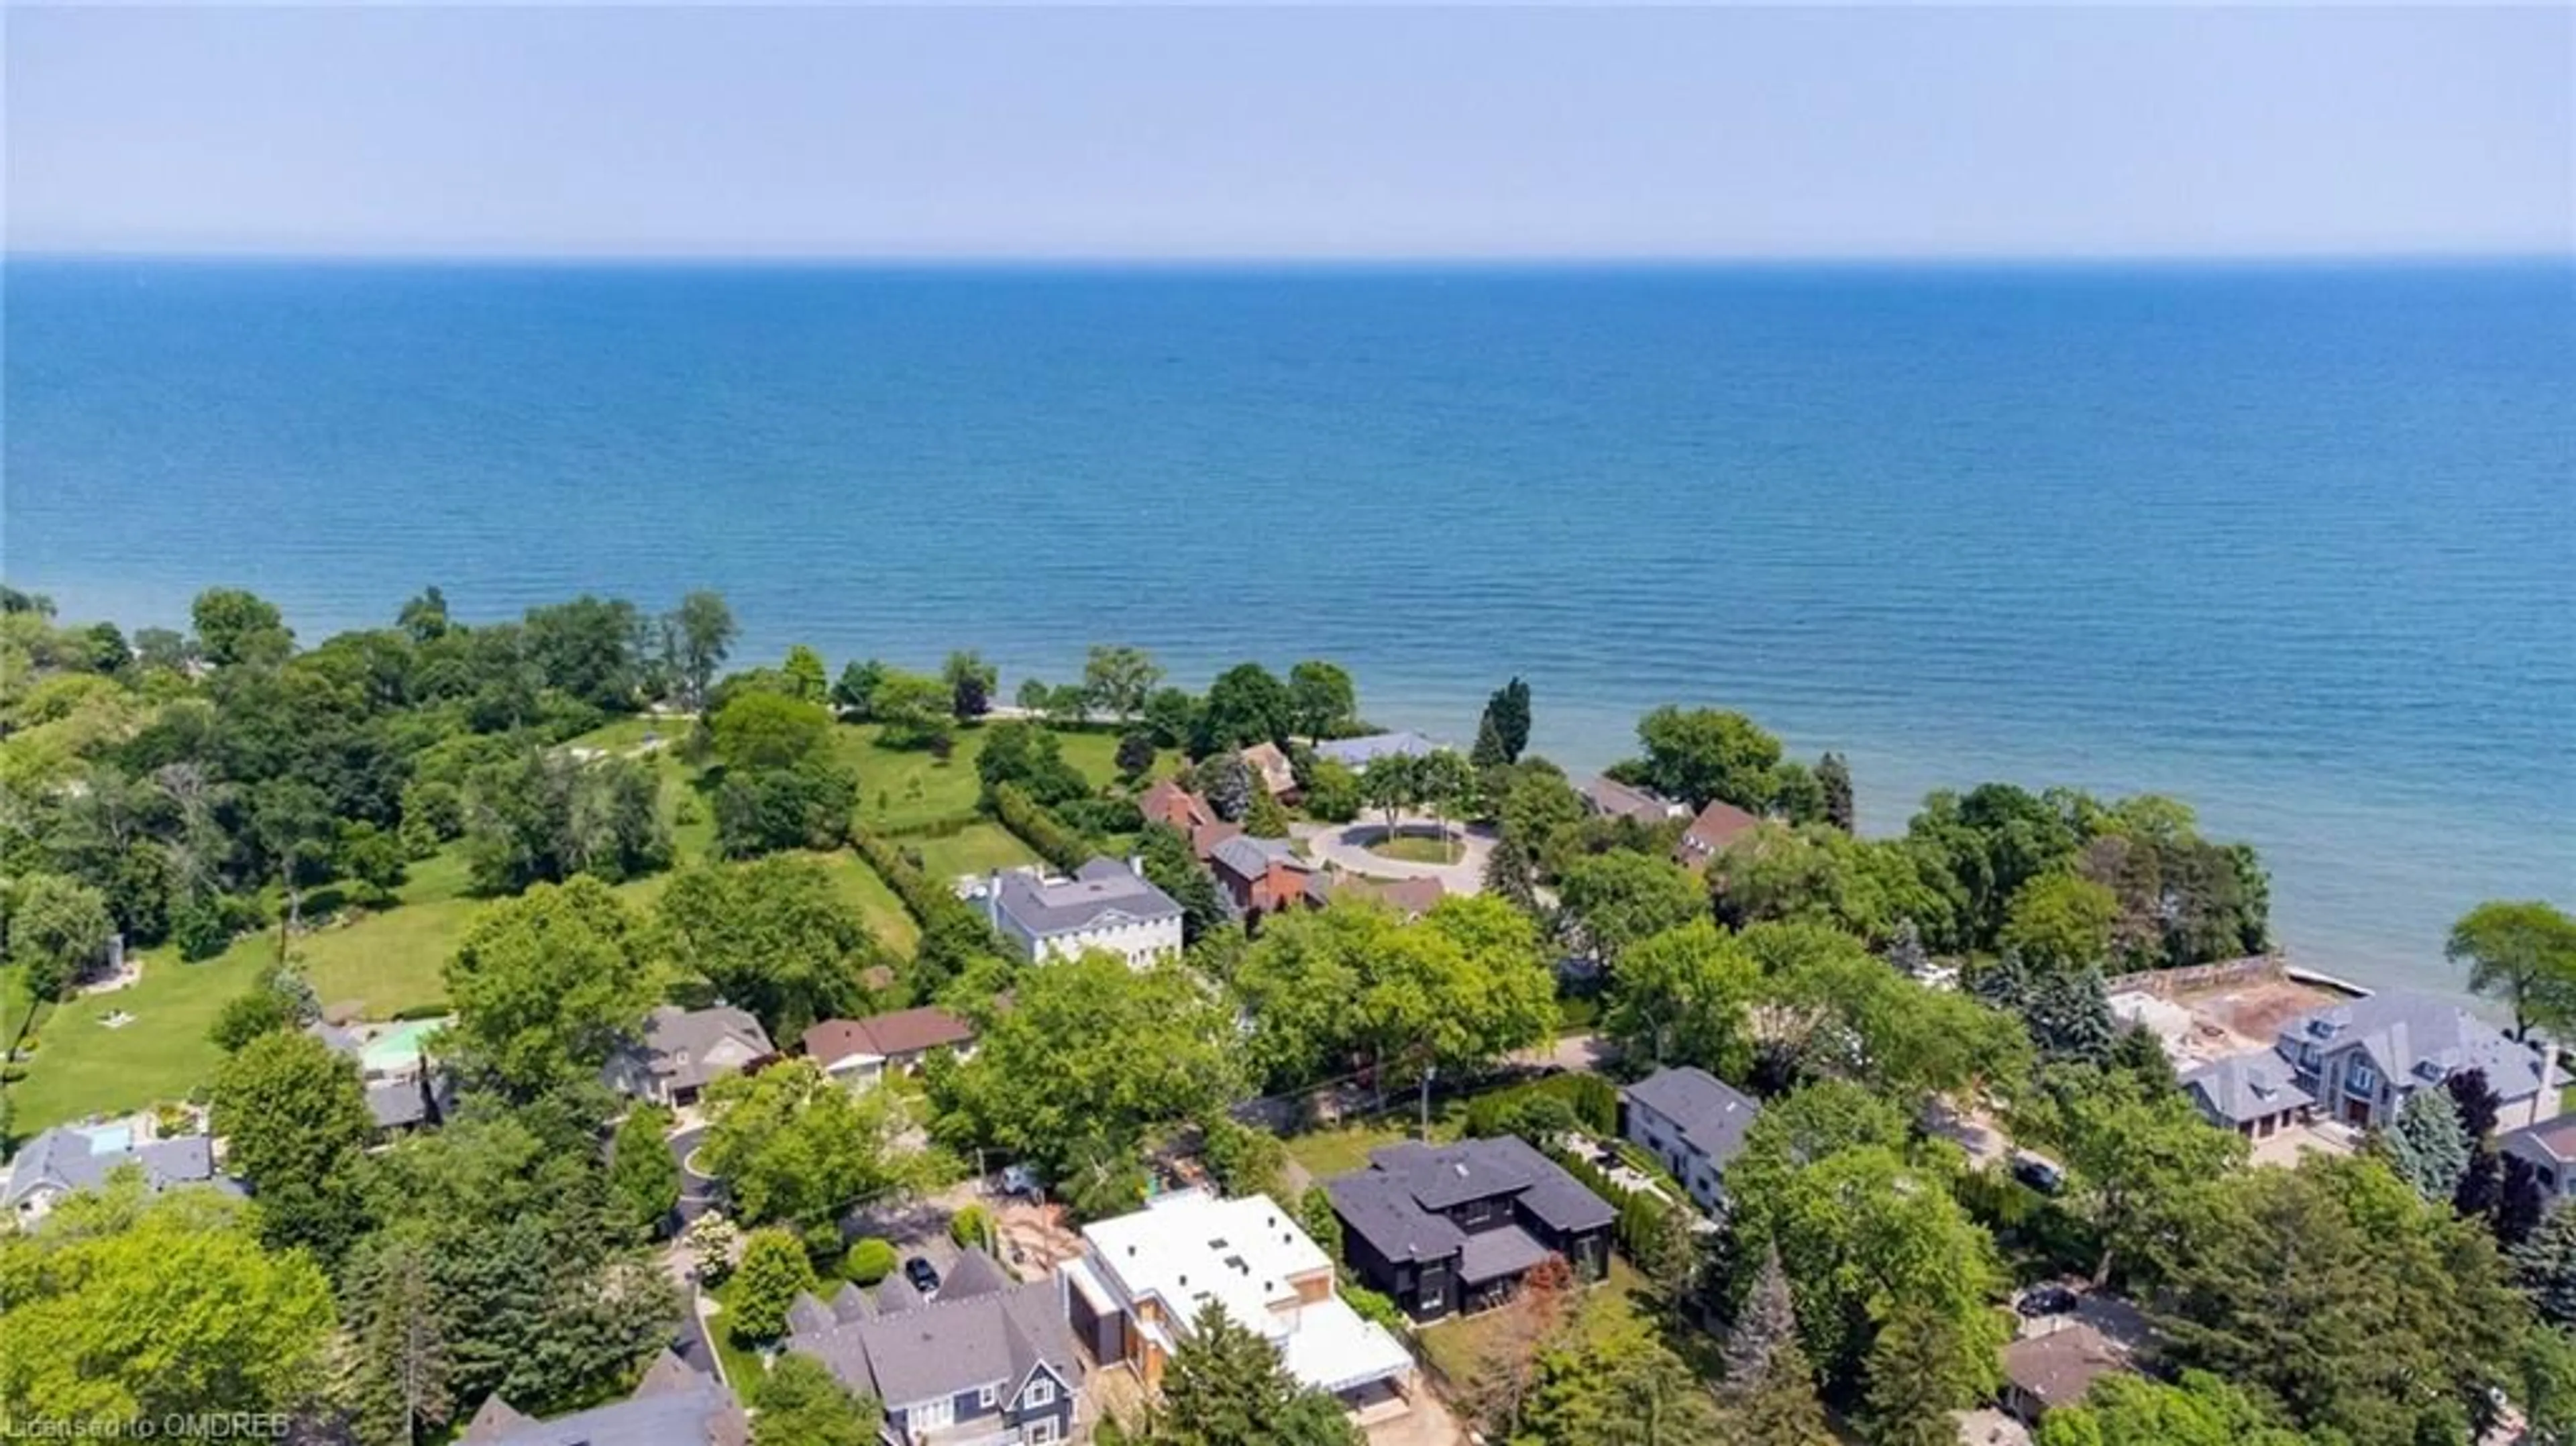 Lakeview for 14 Belvedere Dr, Oakville Ontario L6L 4B6